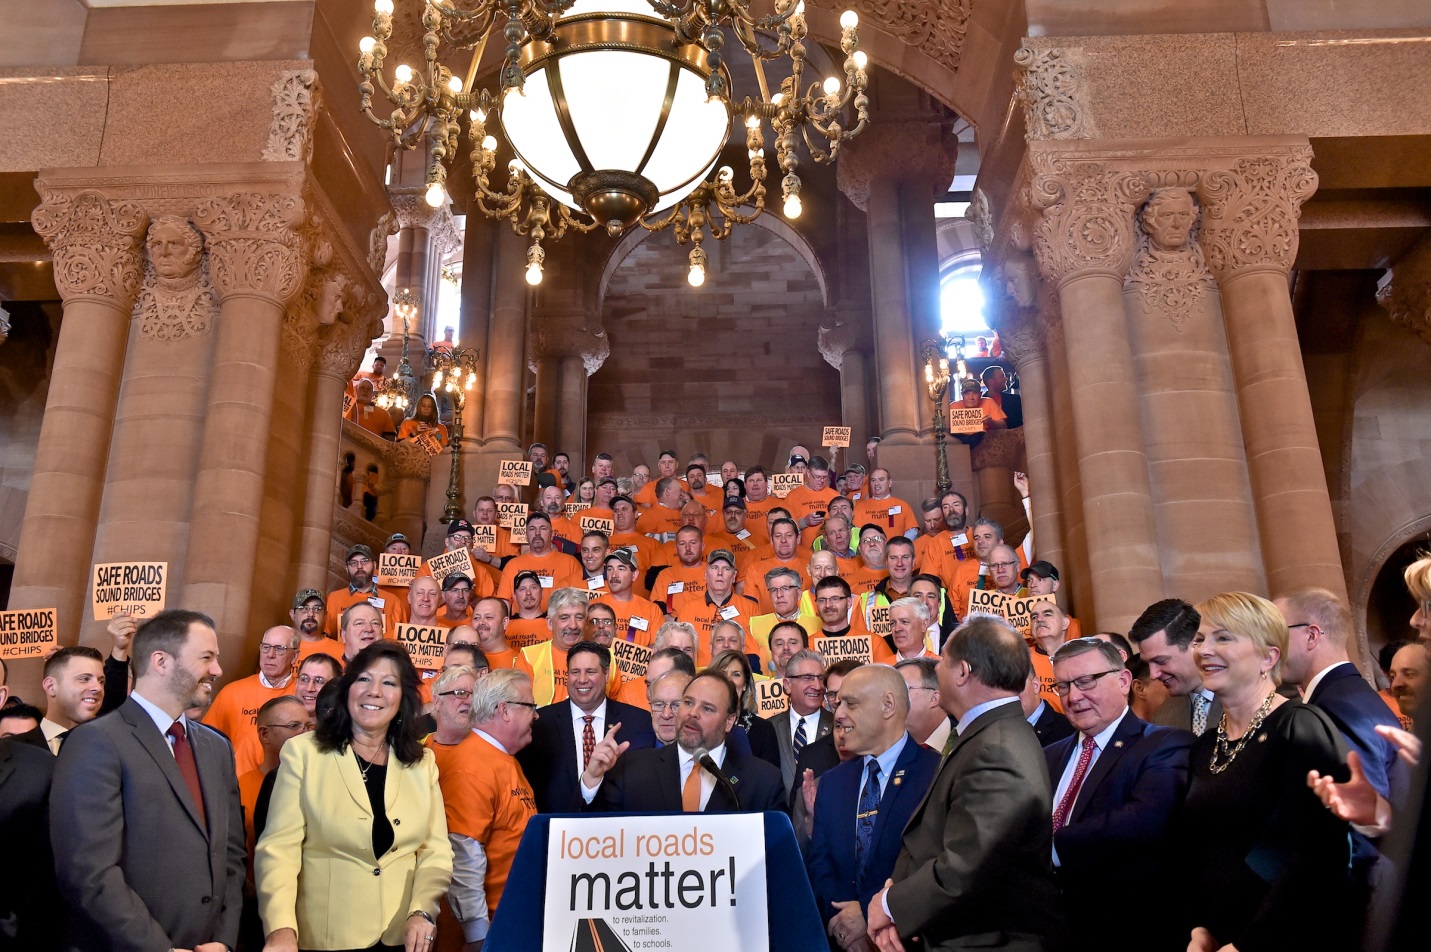 Assemblyman Brian Manktelow (R,C,I,Ref-Lyons) joined his Assembly and Senate colleagues along with hundreds of local highway workers, advocacy group representatives and local government officials for